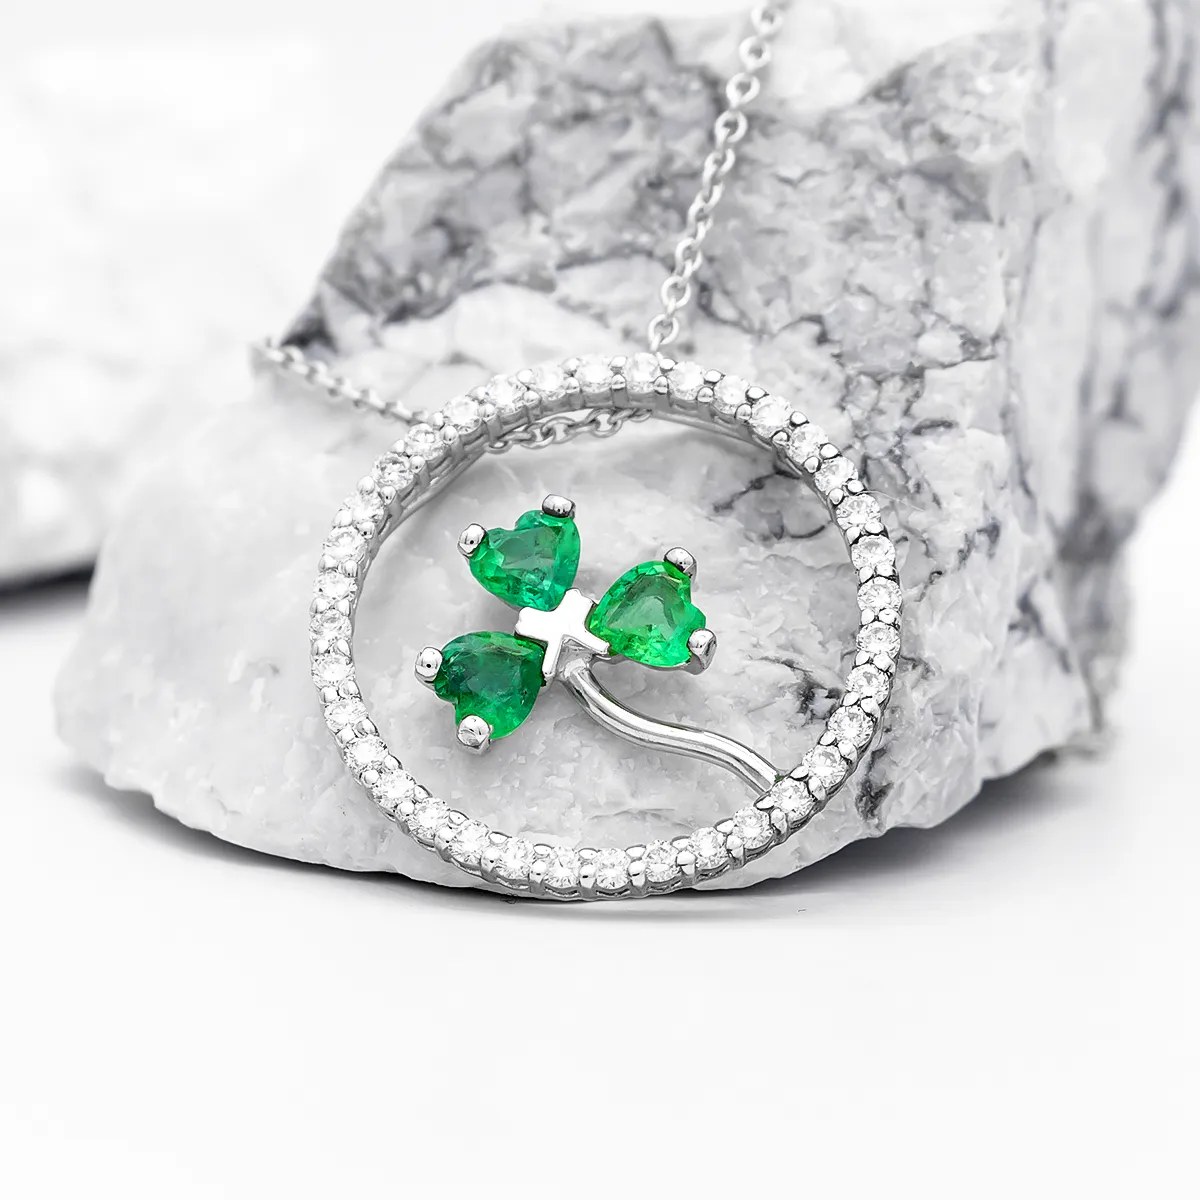 White Gold Shamrock In Circle Pendant Set with Emeralds and Diamonds